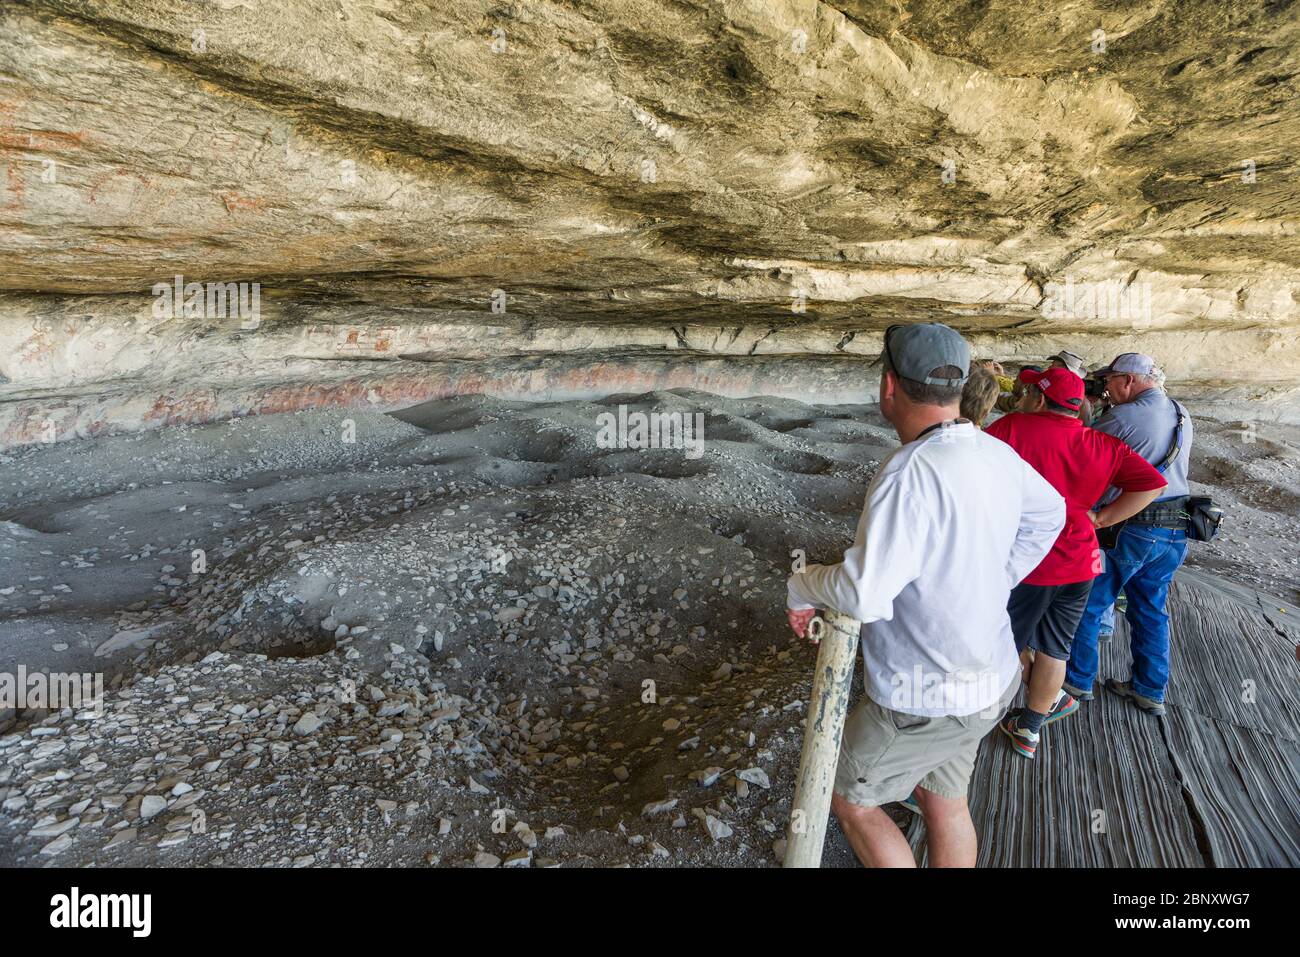 Tourists looking at the various Navajo wall painting pictographs at Fate Bell Shelter, within Seminole Canyon, Texas Stock Photo